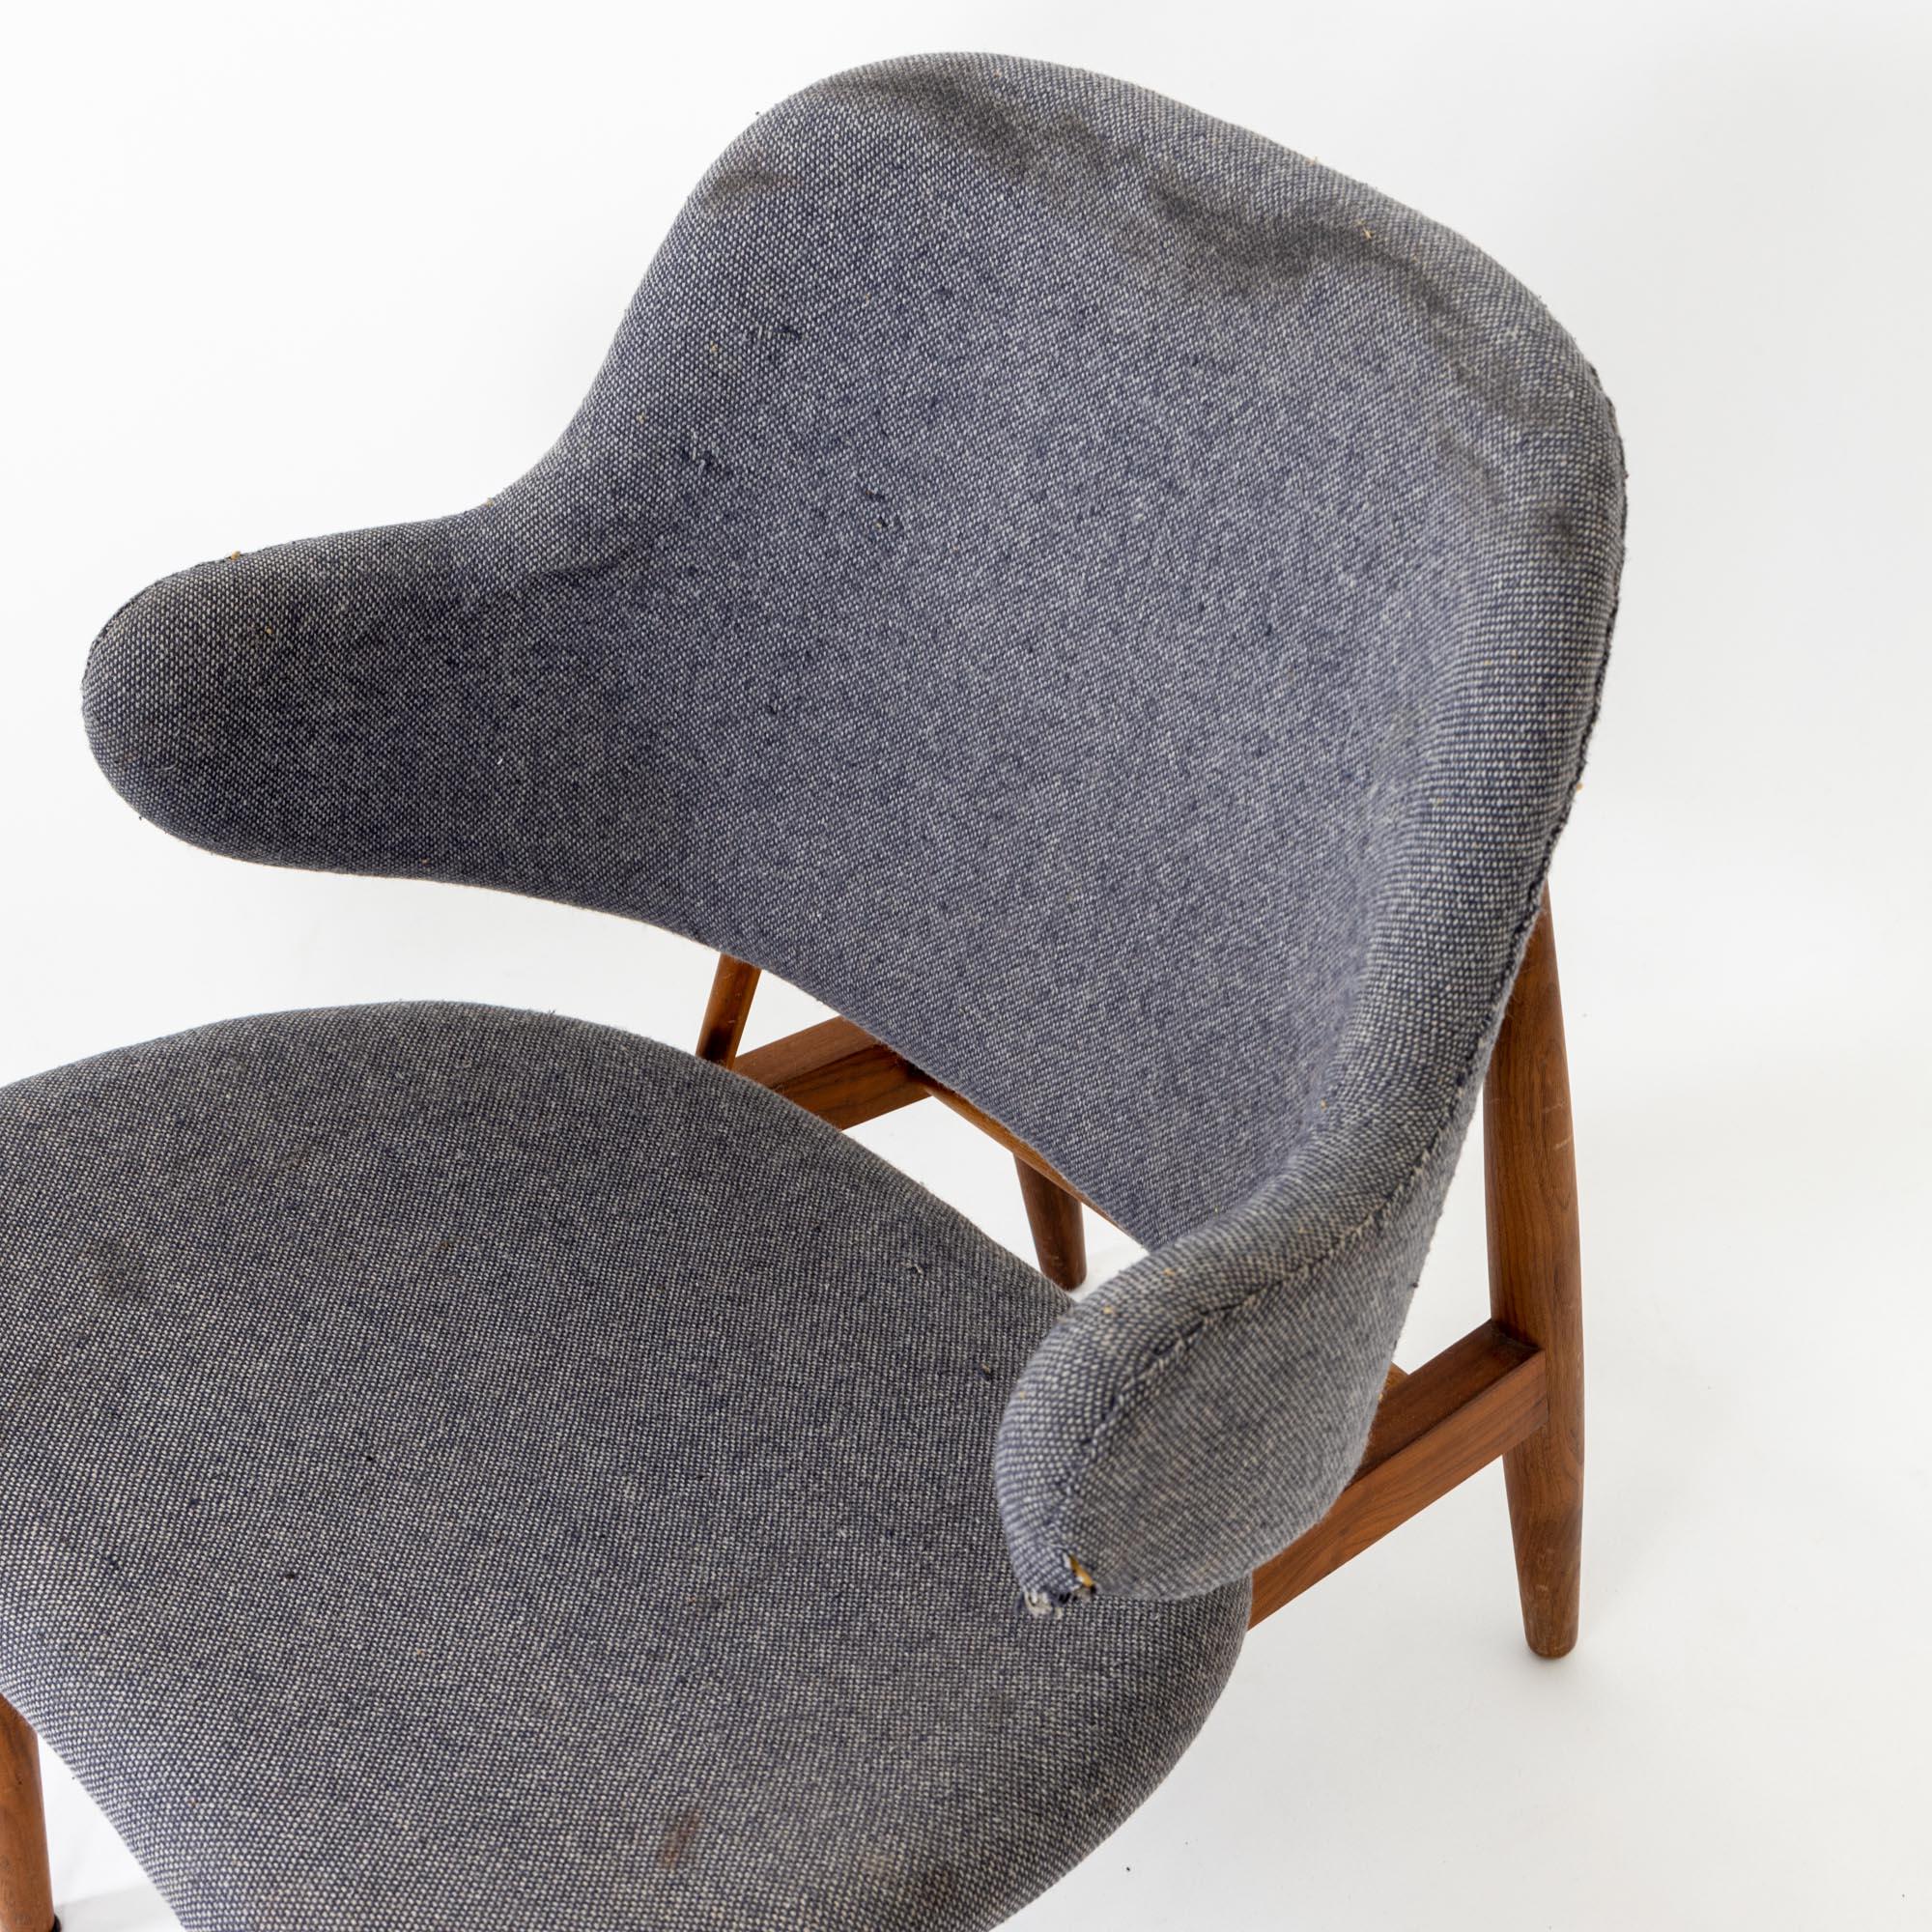 Gray midcentury armchair designed by Danish designer Ib Kofod Larsen in the 1950s. The armchair stands on a dark brown smooth wooden frame and is covered with a gray fabric. The armchair needs to be reupholstered and the wooden frame shows signs of